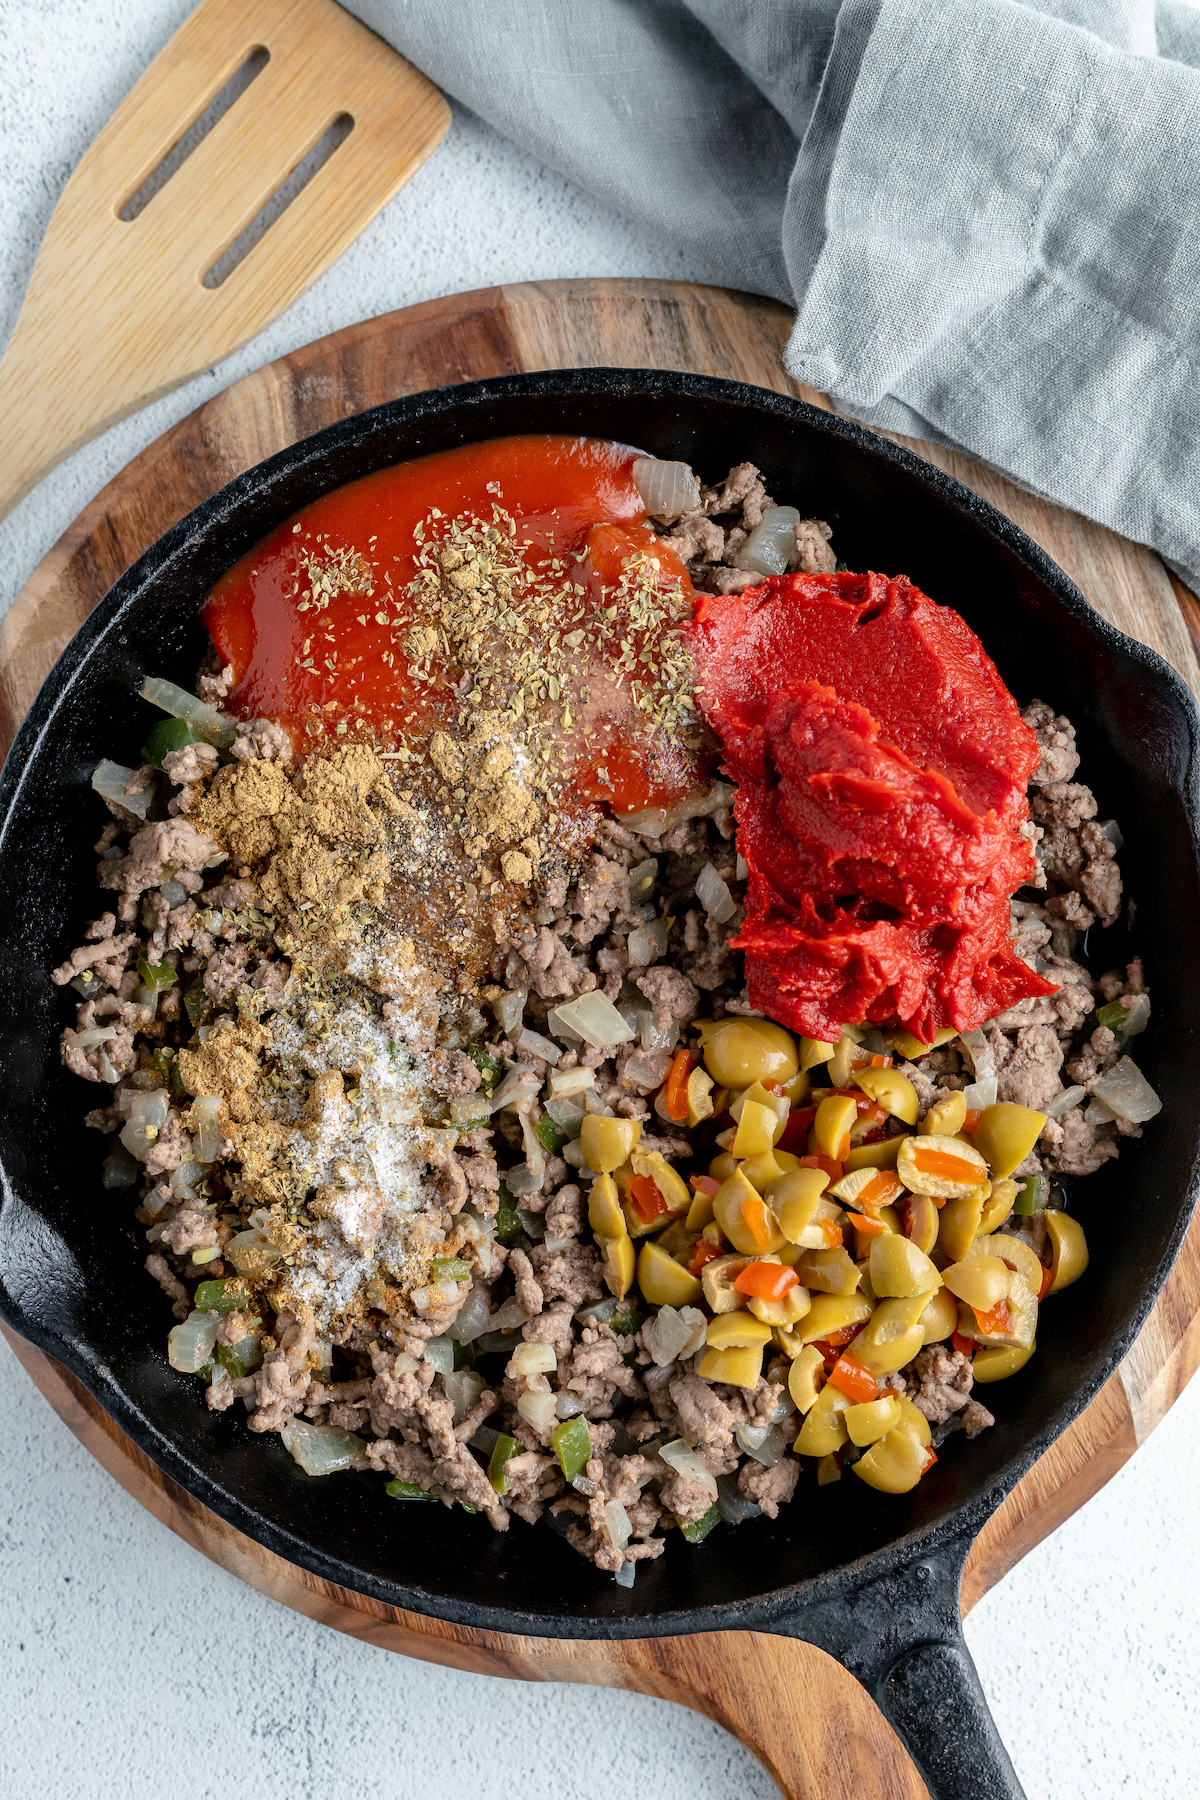 Ground beef, tomato paste, green olives, and other ingredients in a cast iron skillet.